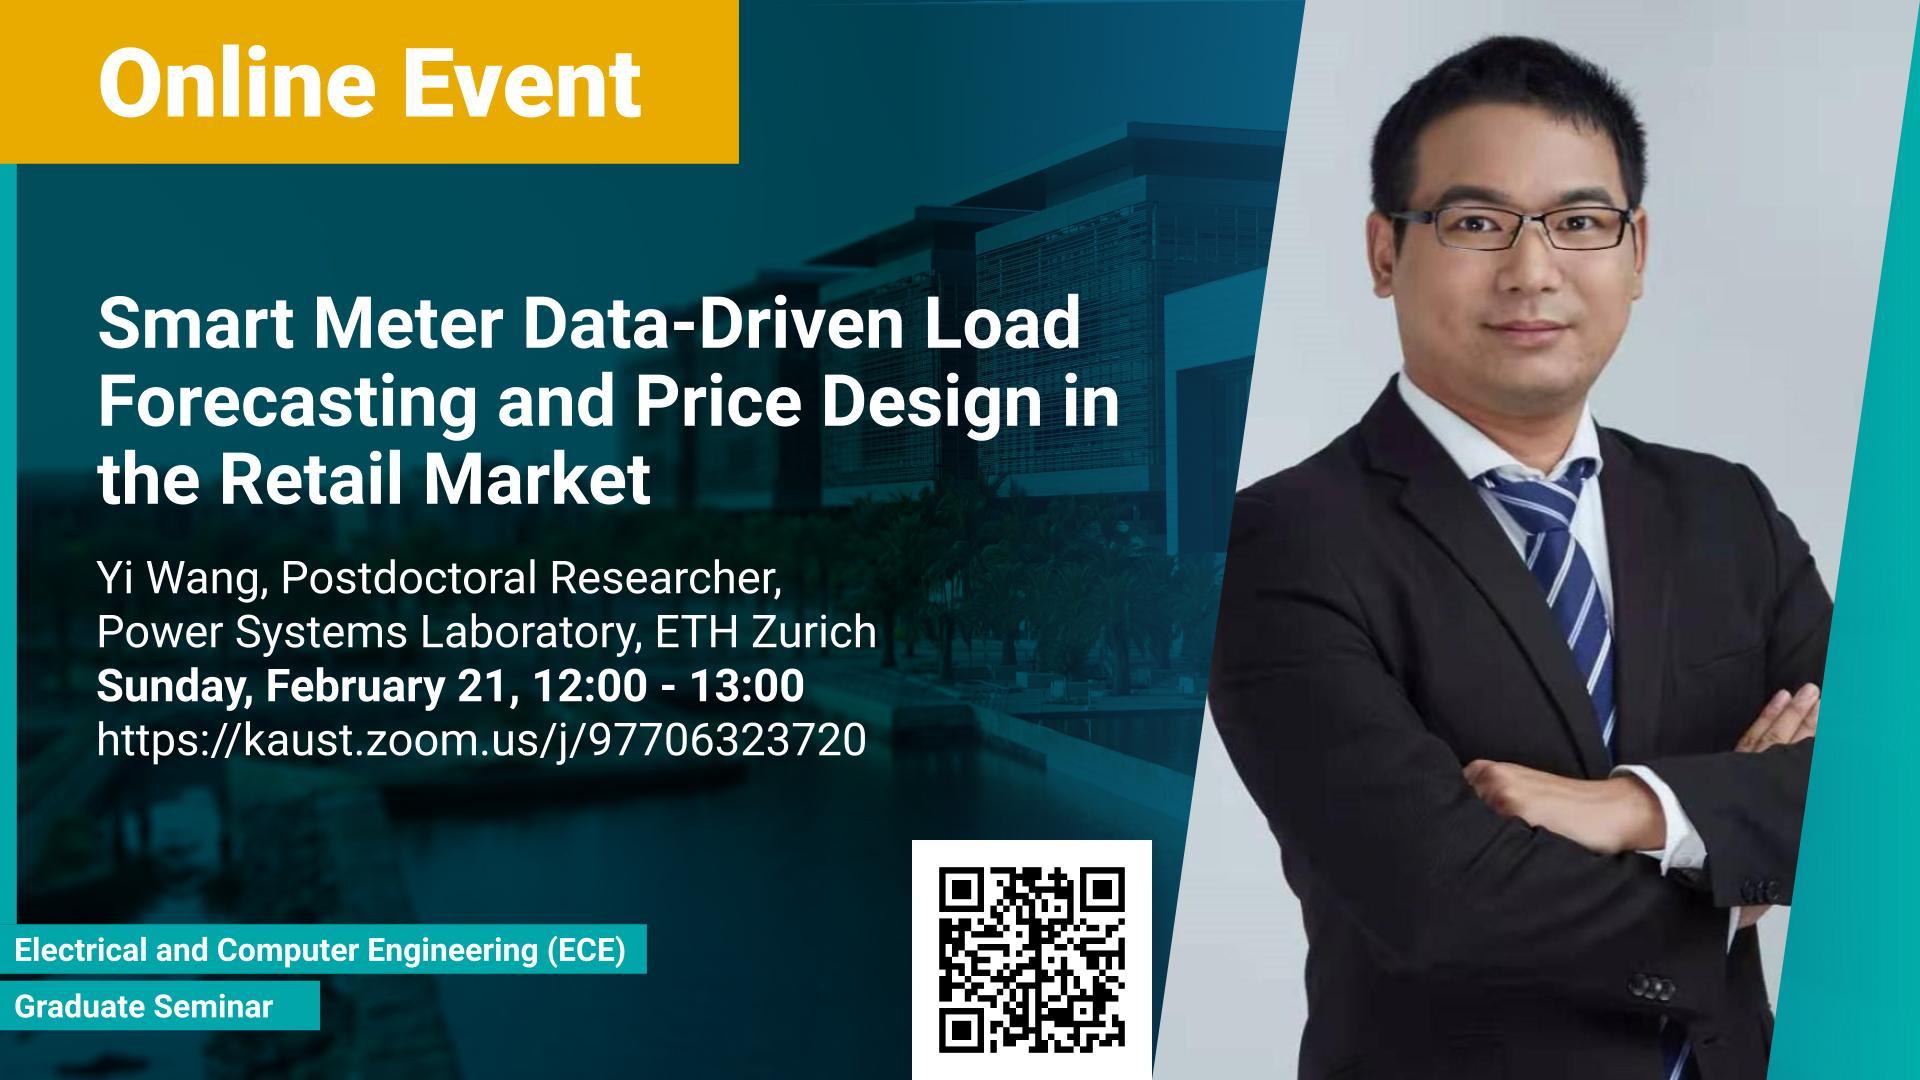 KAUST CEMSE ECE Graduate Seminar Smart Meter Data Driven Load Forecasting and Price Design in the Retail Market